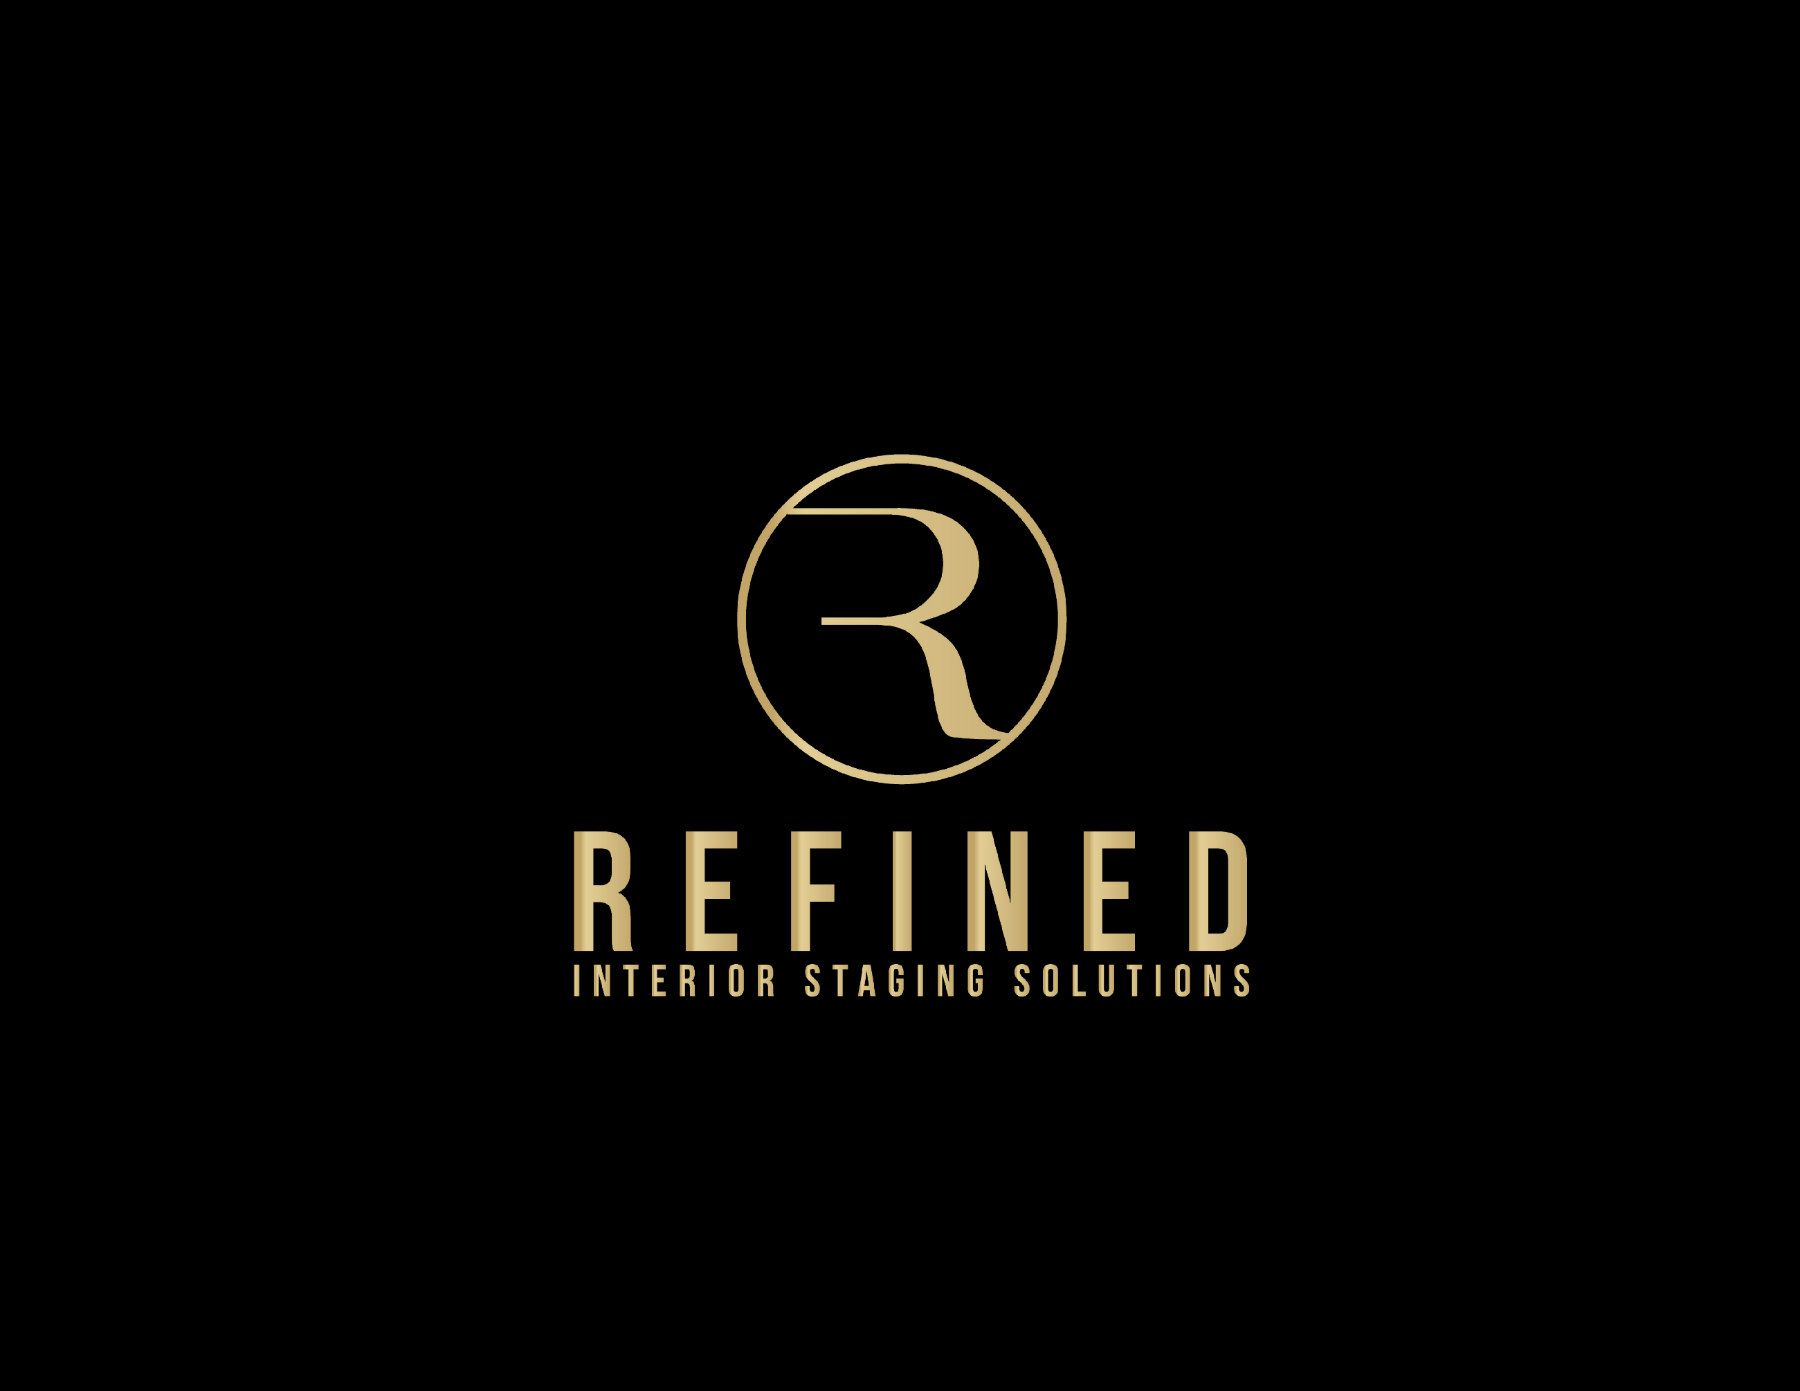 Refined Interior Staging Solutions Logo